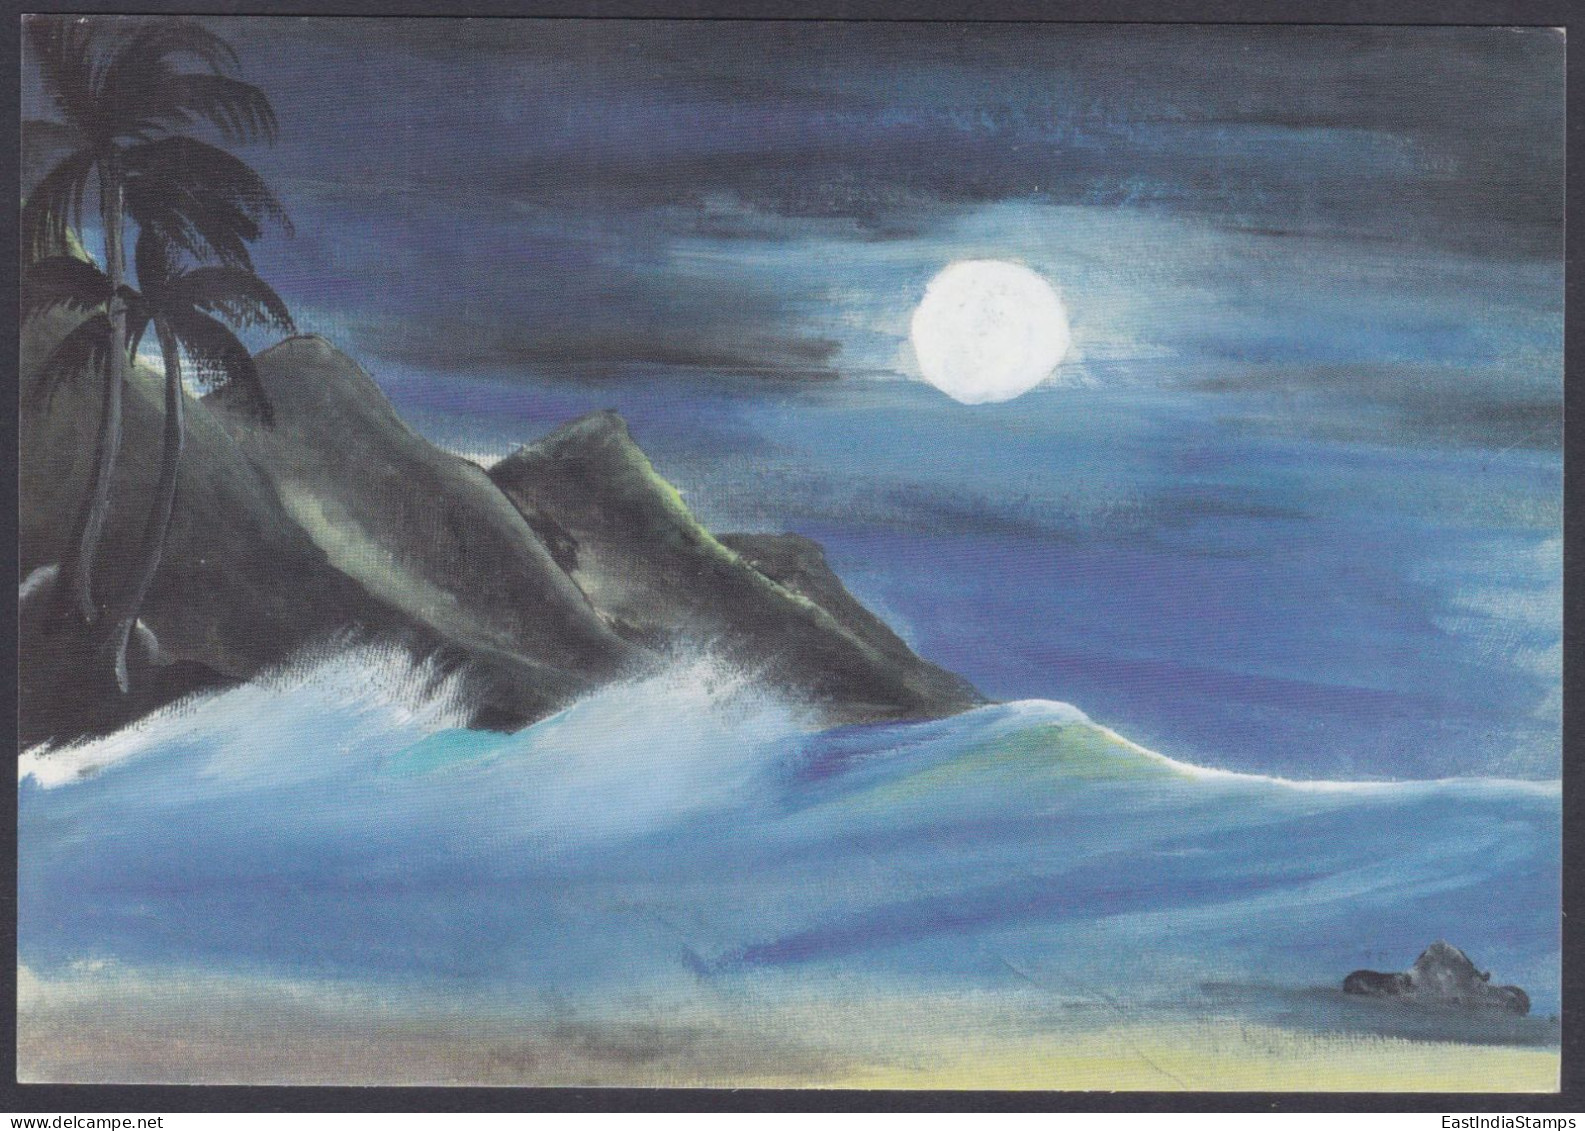 Inde India 2007 Mint Postcard Children's Day, Child, Drawing, Painting, Moon, Night, Trees, Waves, Sea, Mountain - India